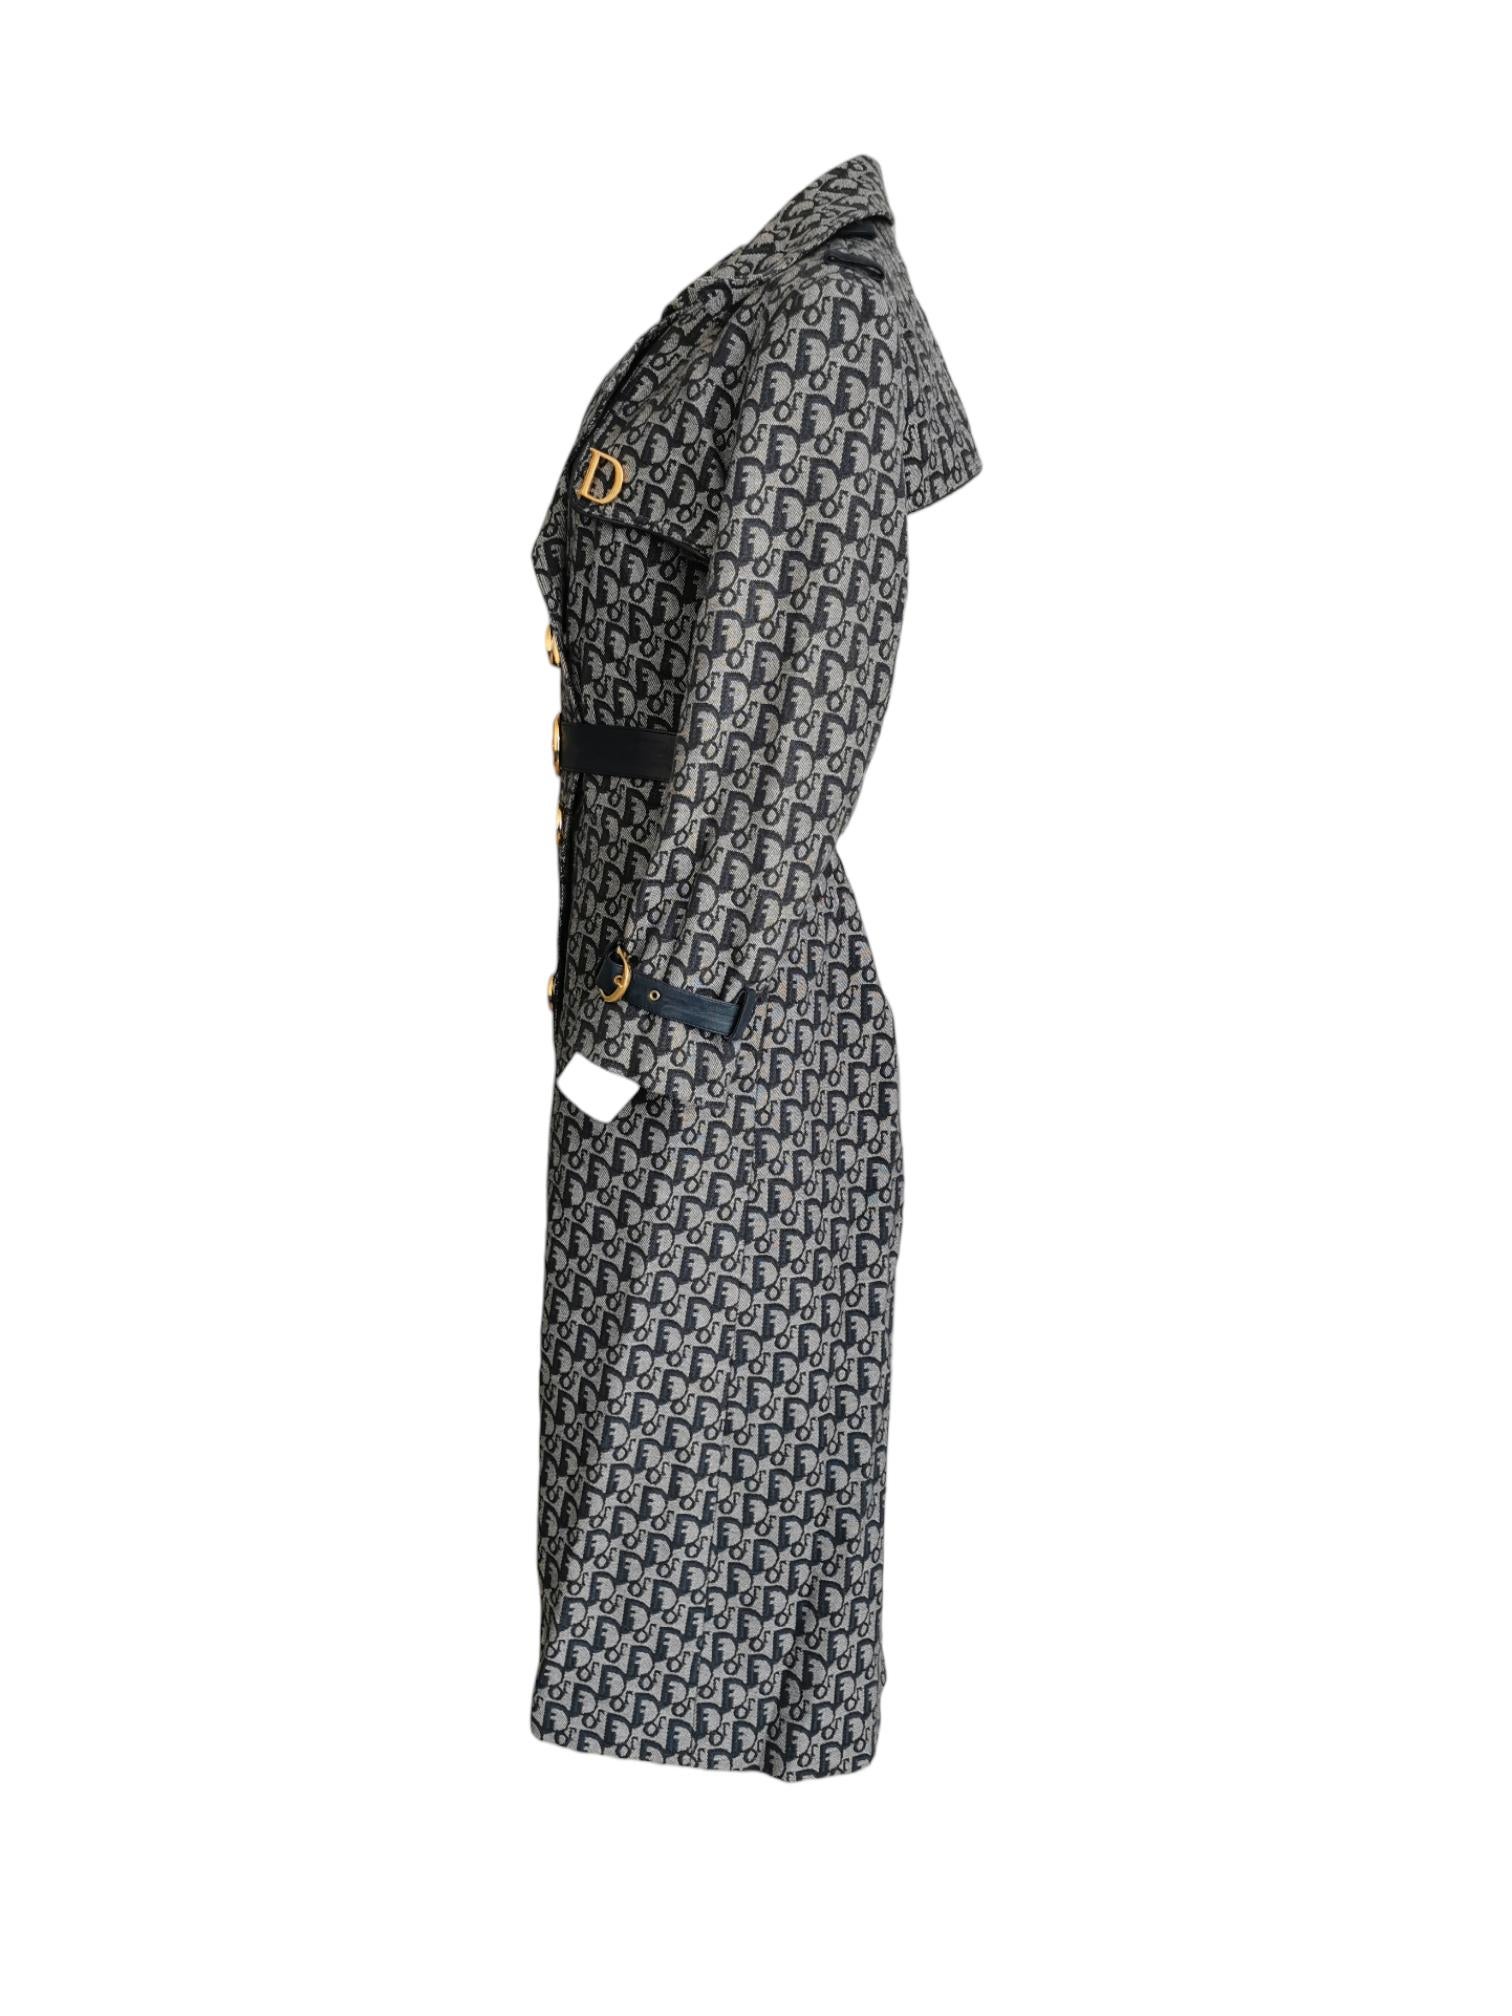 Dior monogram runway trench coat, FW 2000 In Excellent Condition For Sale In London, GB